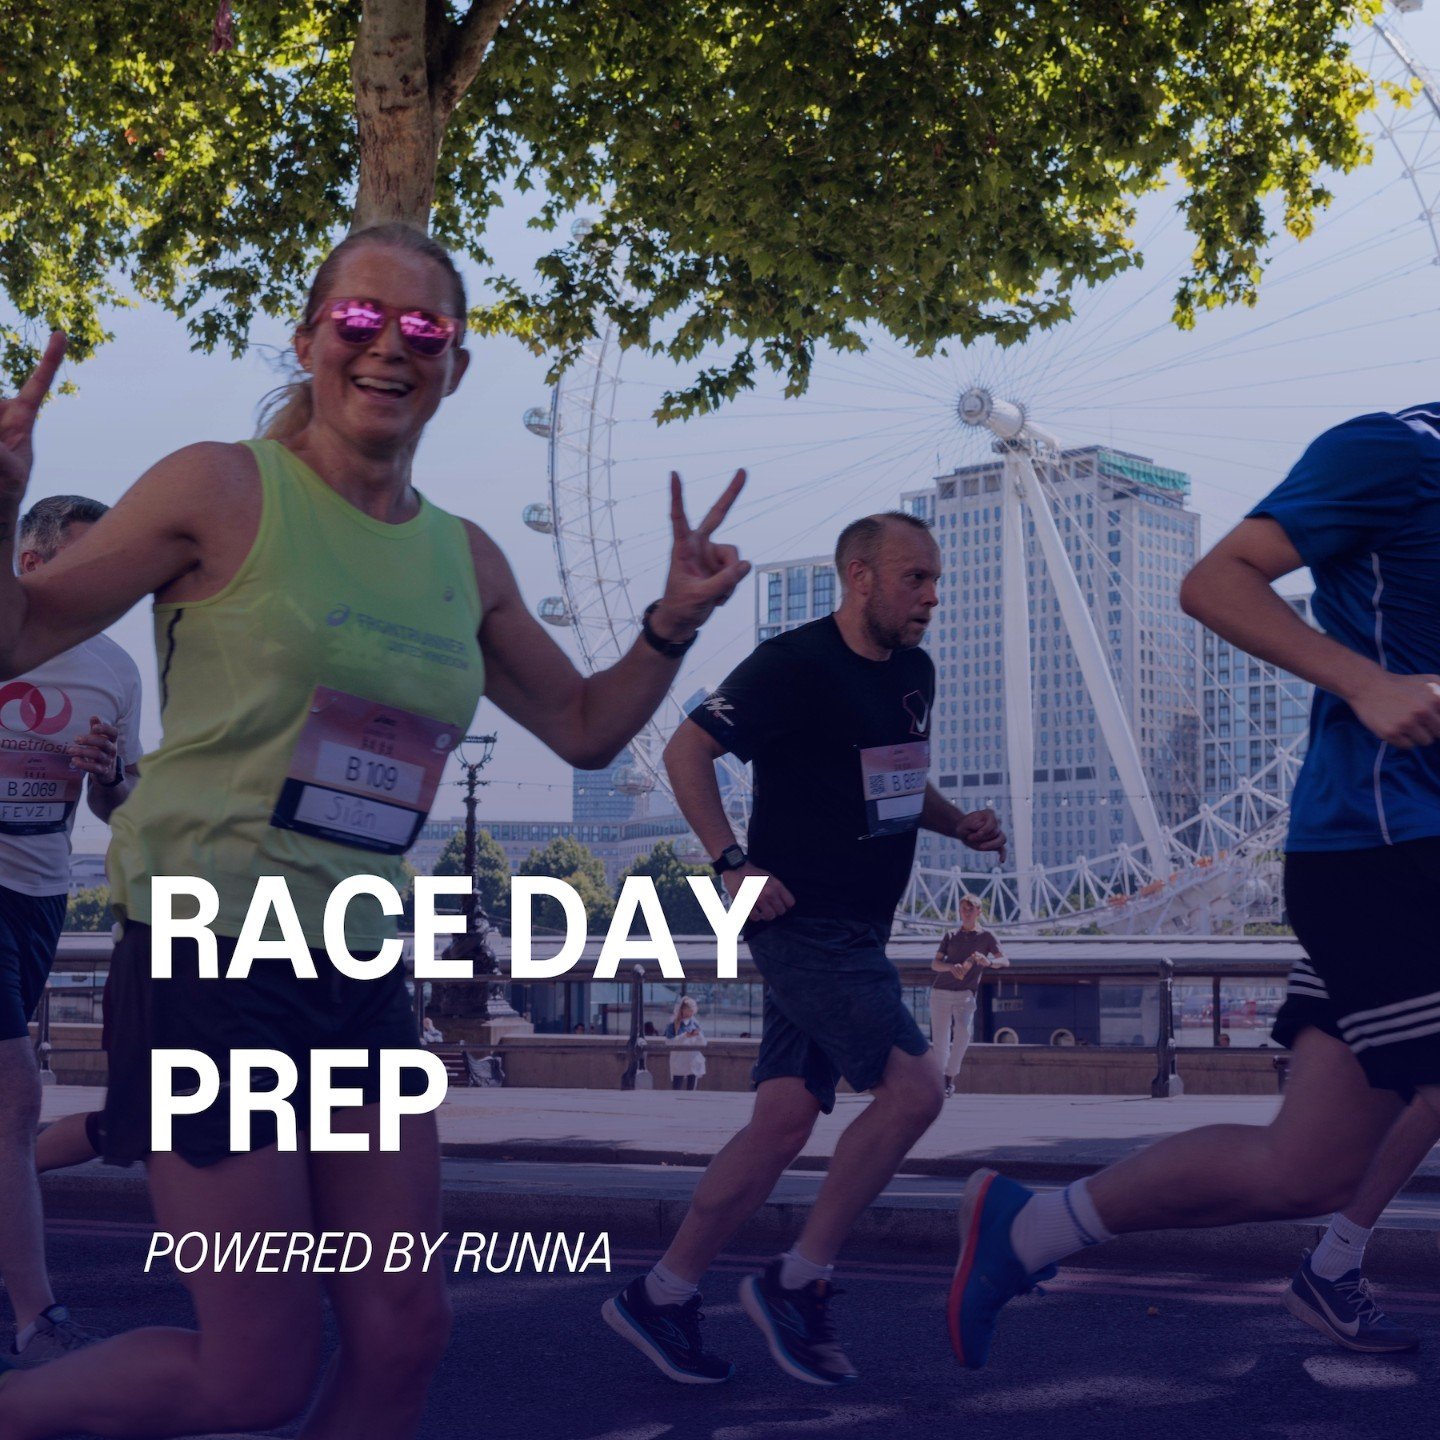 LET'S SMASH RACE DAY 🤝

With just over 12 weeks to go, it's time to fine-tune your training and get race day ready with these top tips 🎯

👉 1. SPEED WORK: Incorporate tempo and interval training to boost speed and endurance.

👉 2. LONG RUNS: Grad